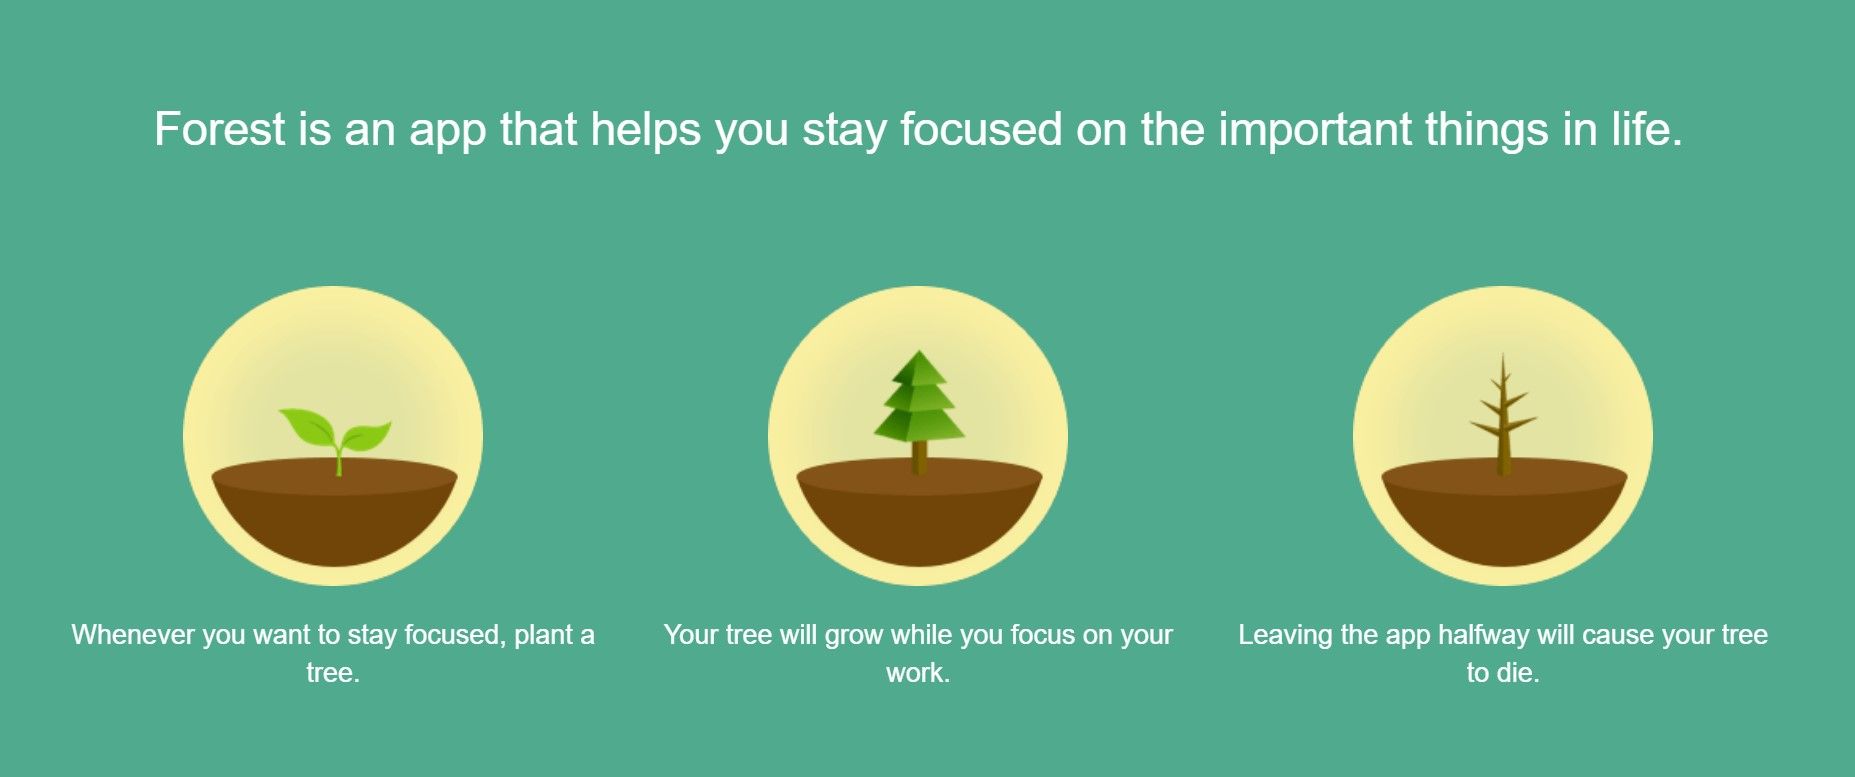 Forest landing page